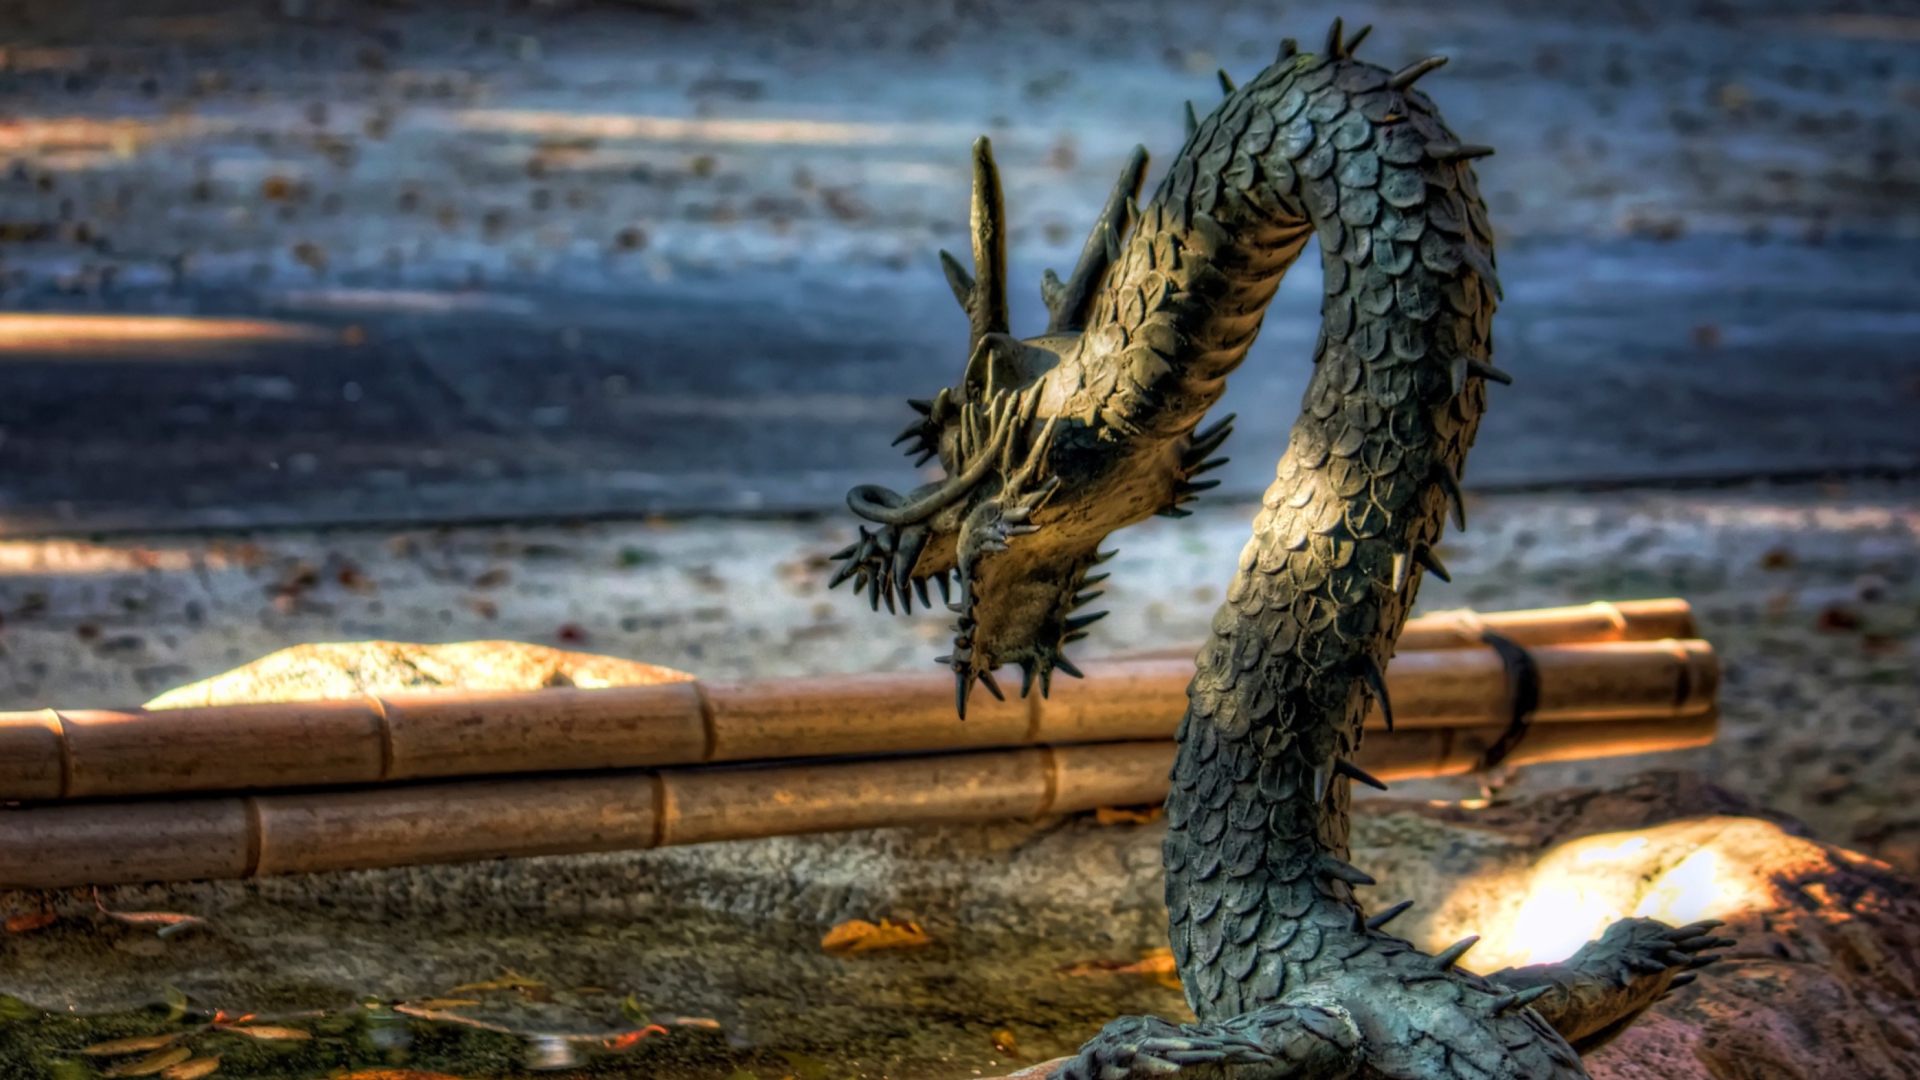 Chained Dragon wallpaper 1920x1080